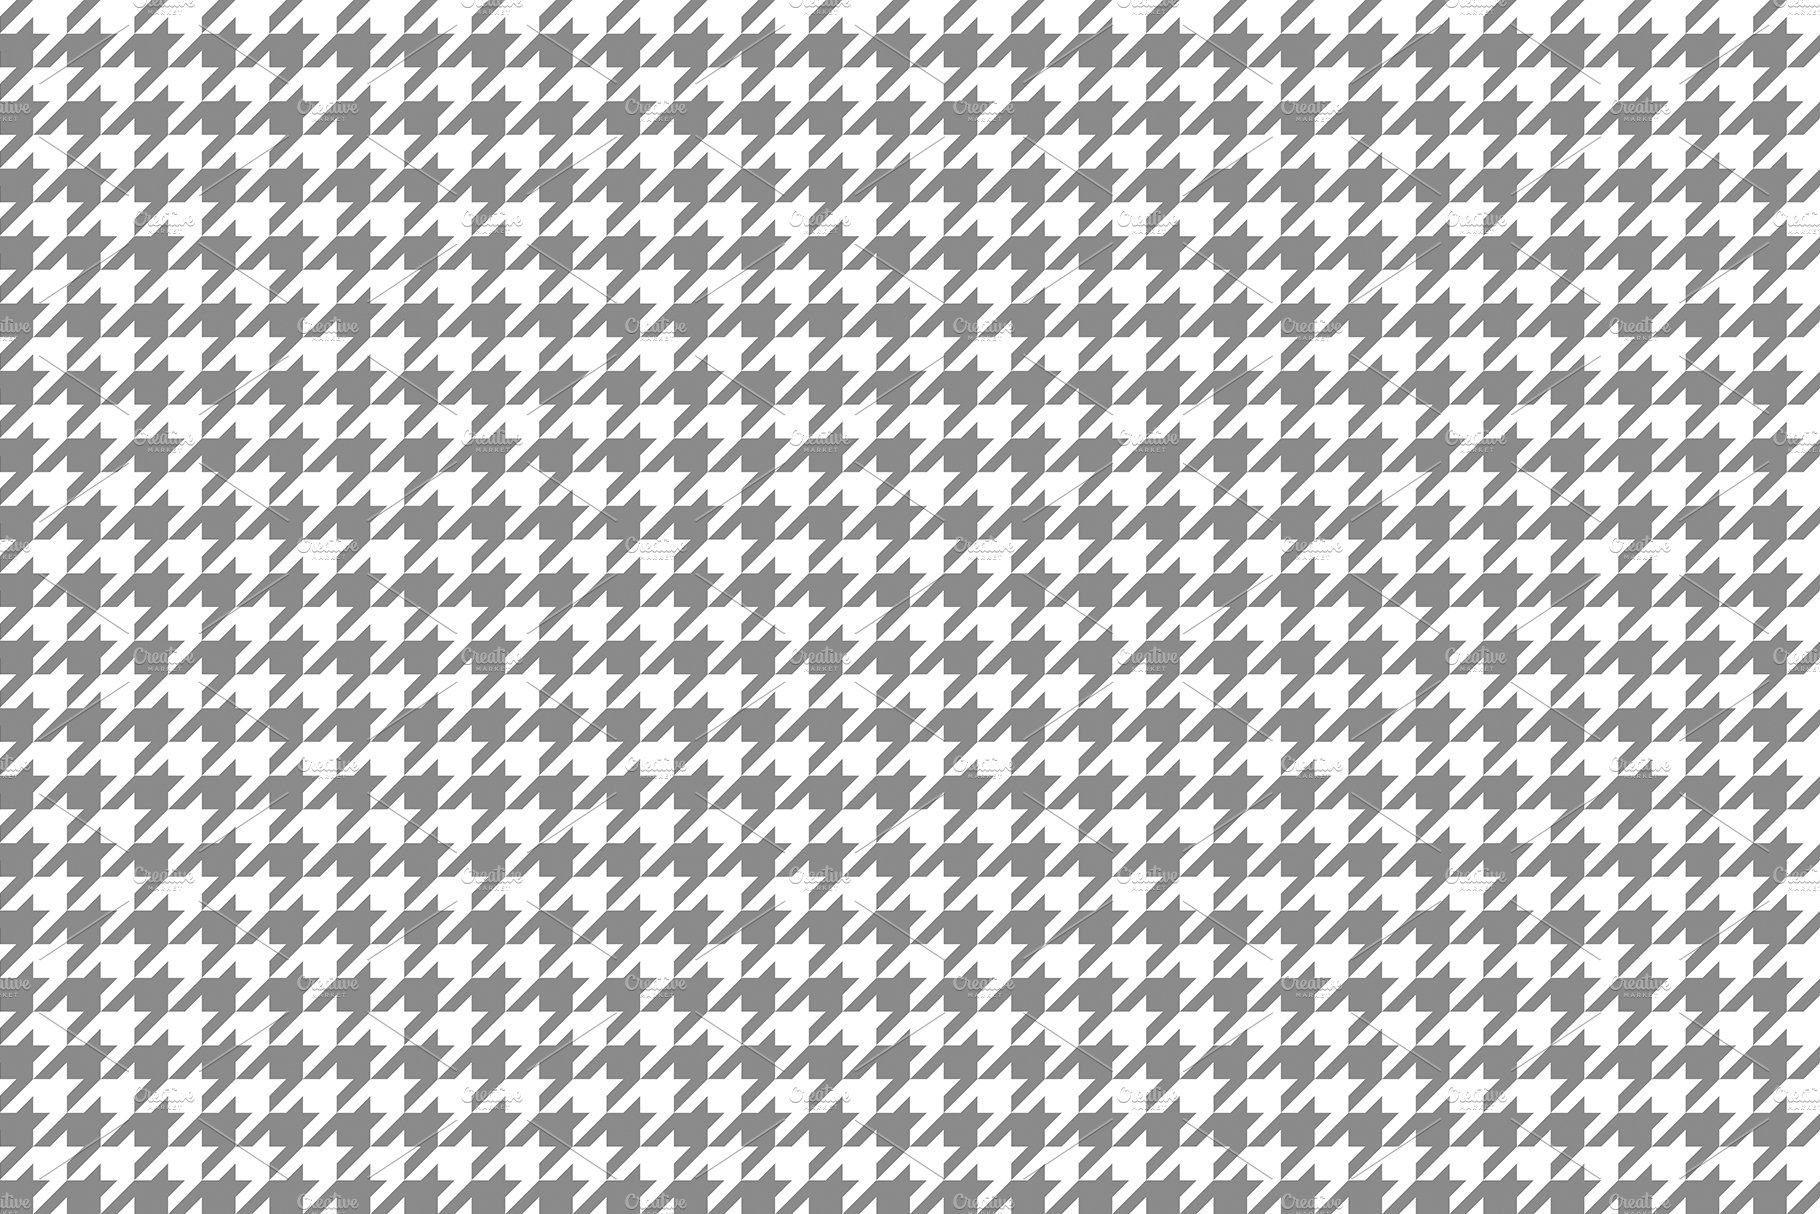 20 houndstooth pattern background texture copy 461